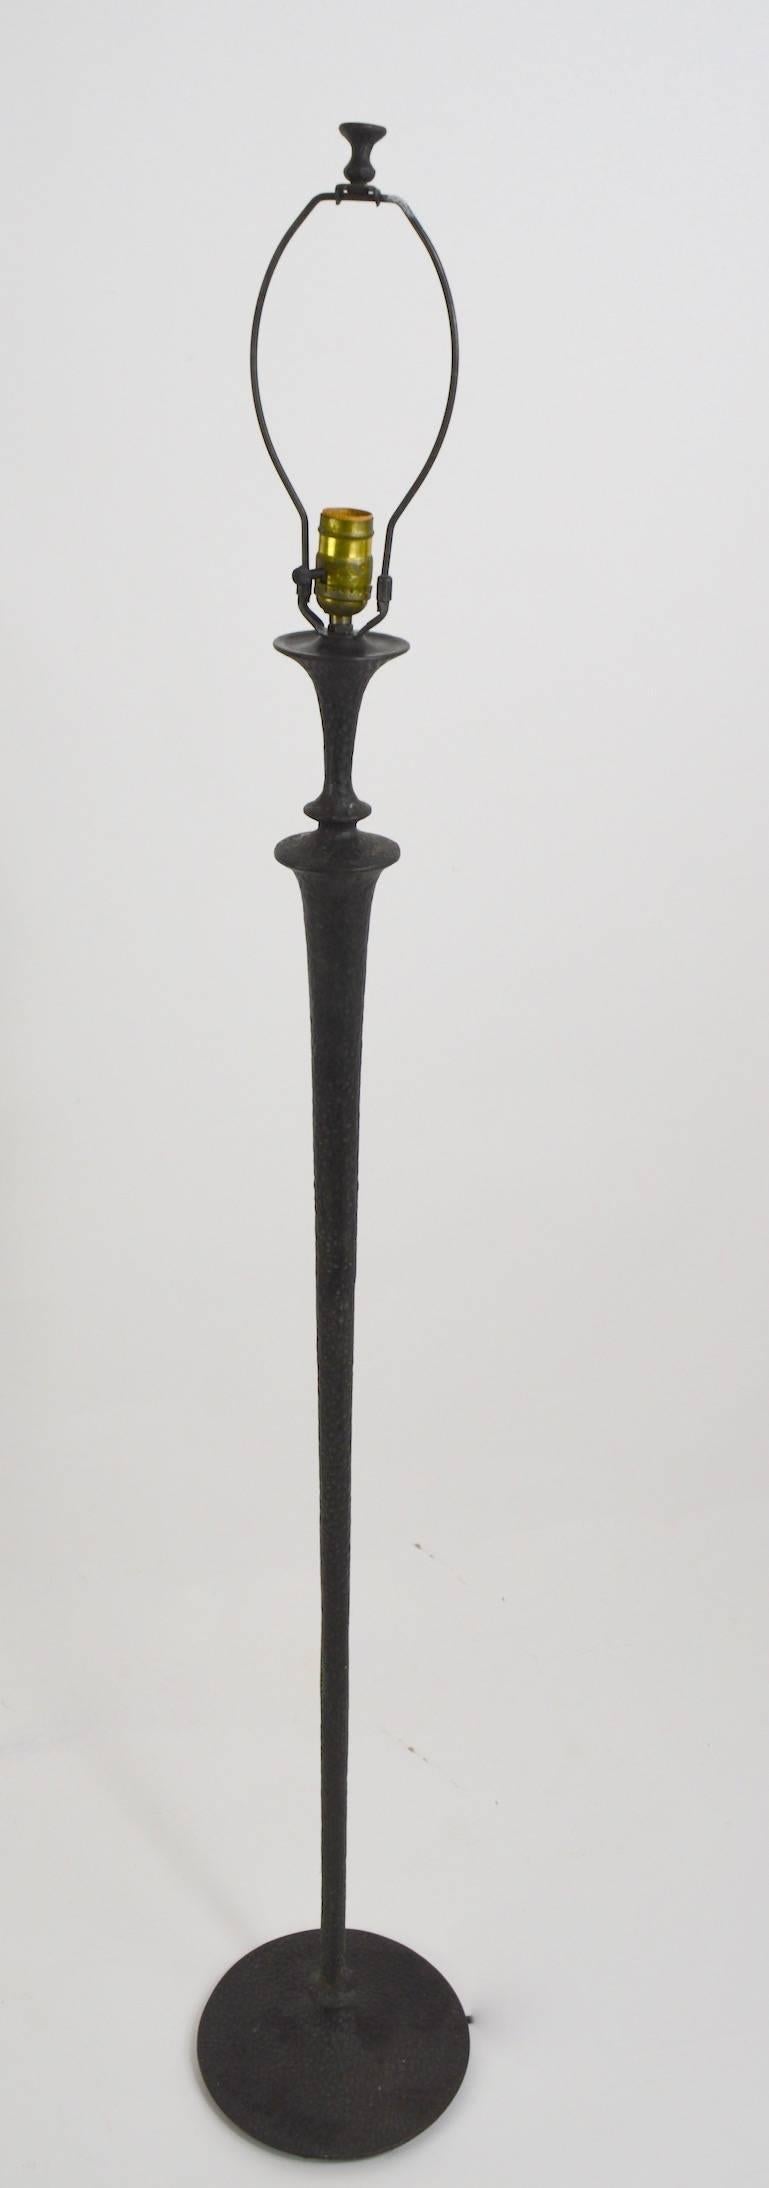 Good quality bronze floor lamp. Solid cast to a hammered surface with a darkened black finish, clean, original, working condition, shade not included. Measures: Height tom top of black base 48 inches, total H including harp 60 inches.